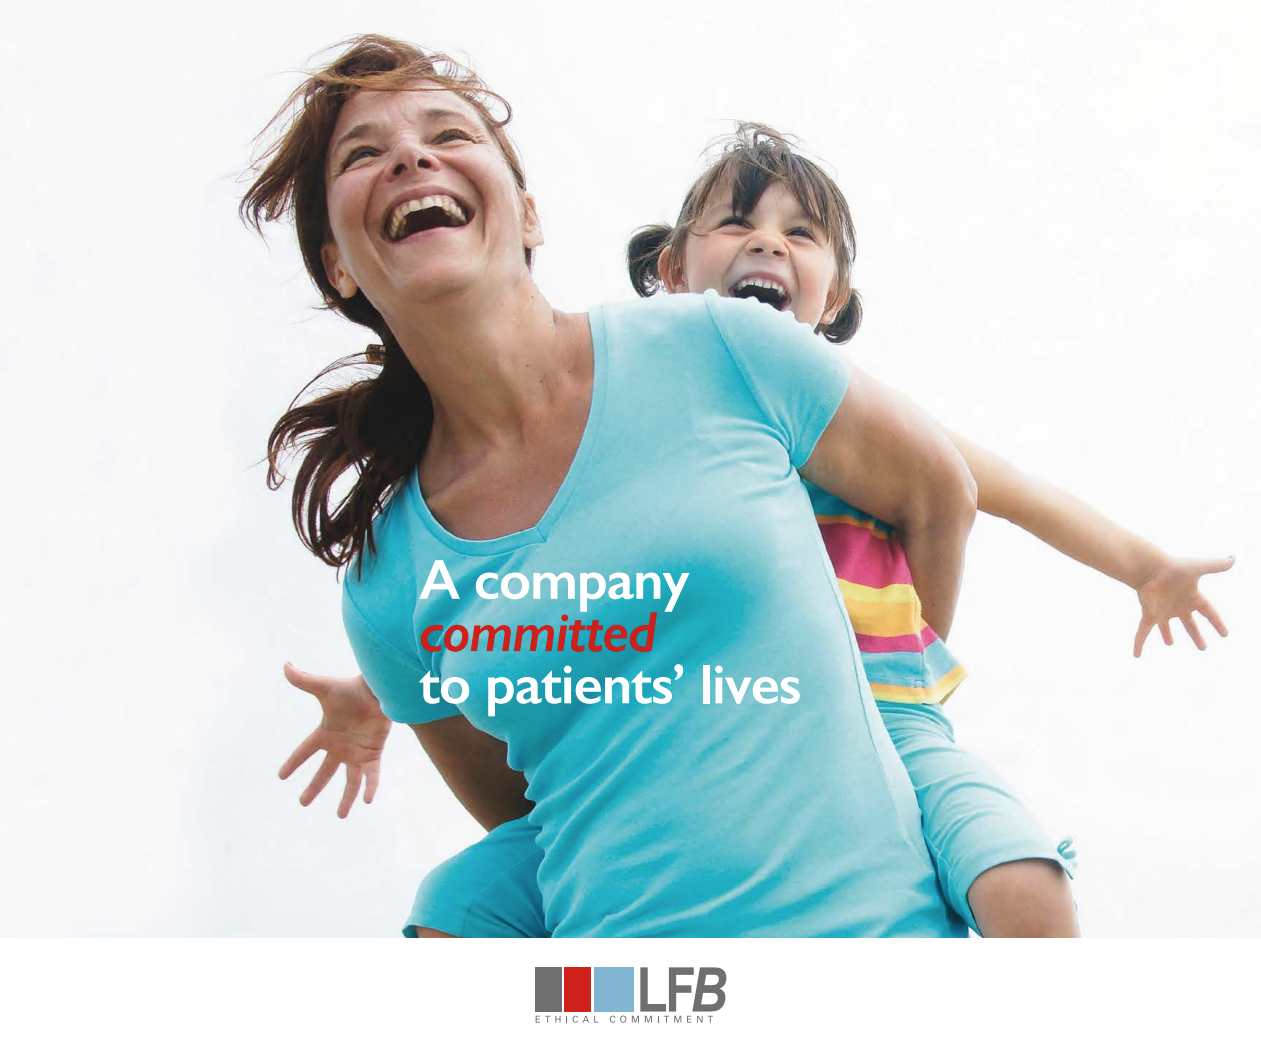 photo mère et fille, slogan LFB "a company commited to patients lives", logo groupe lfb